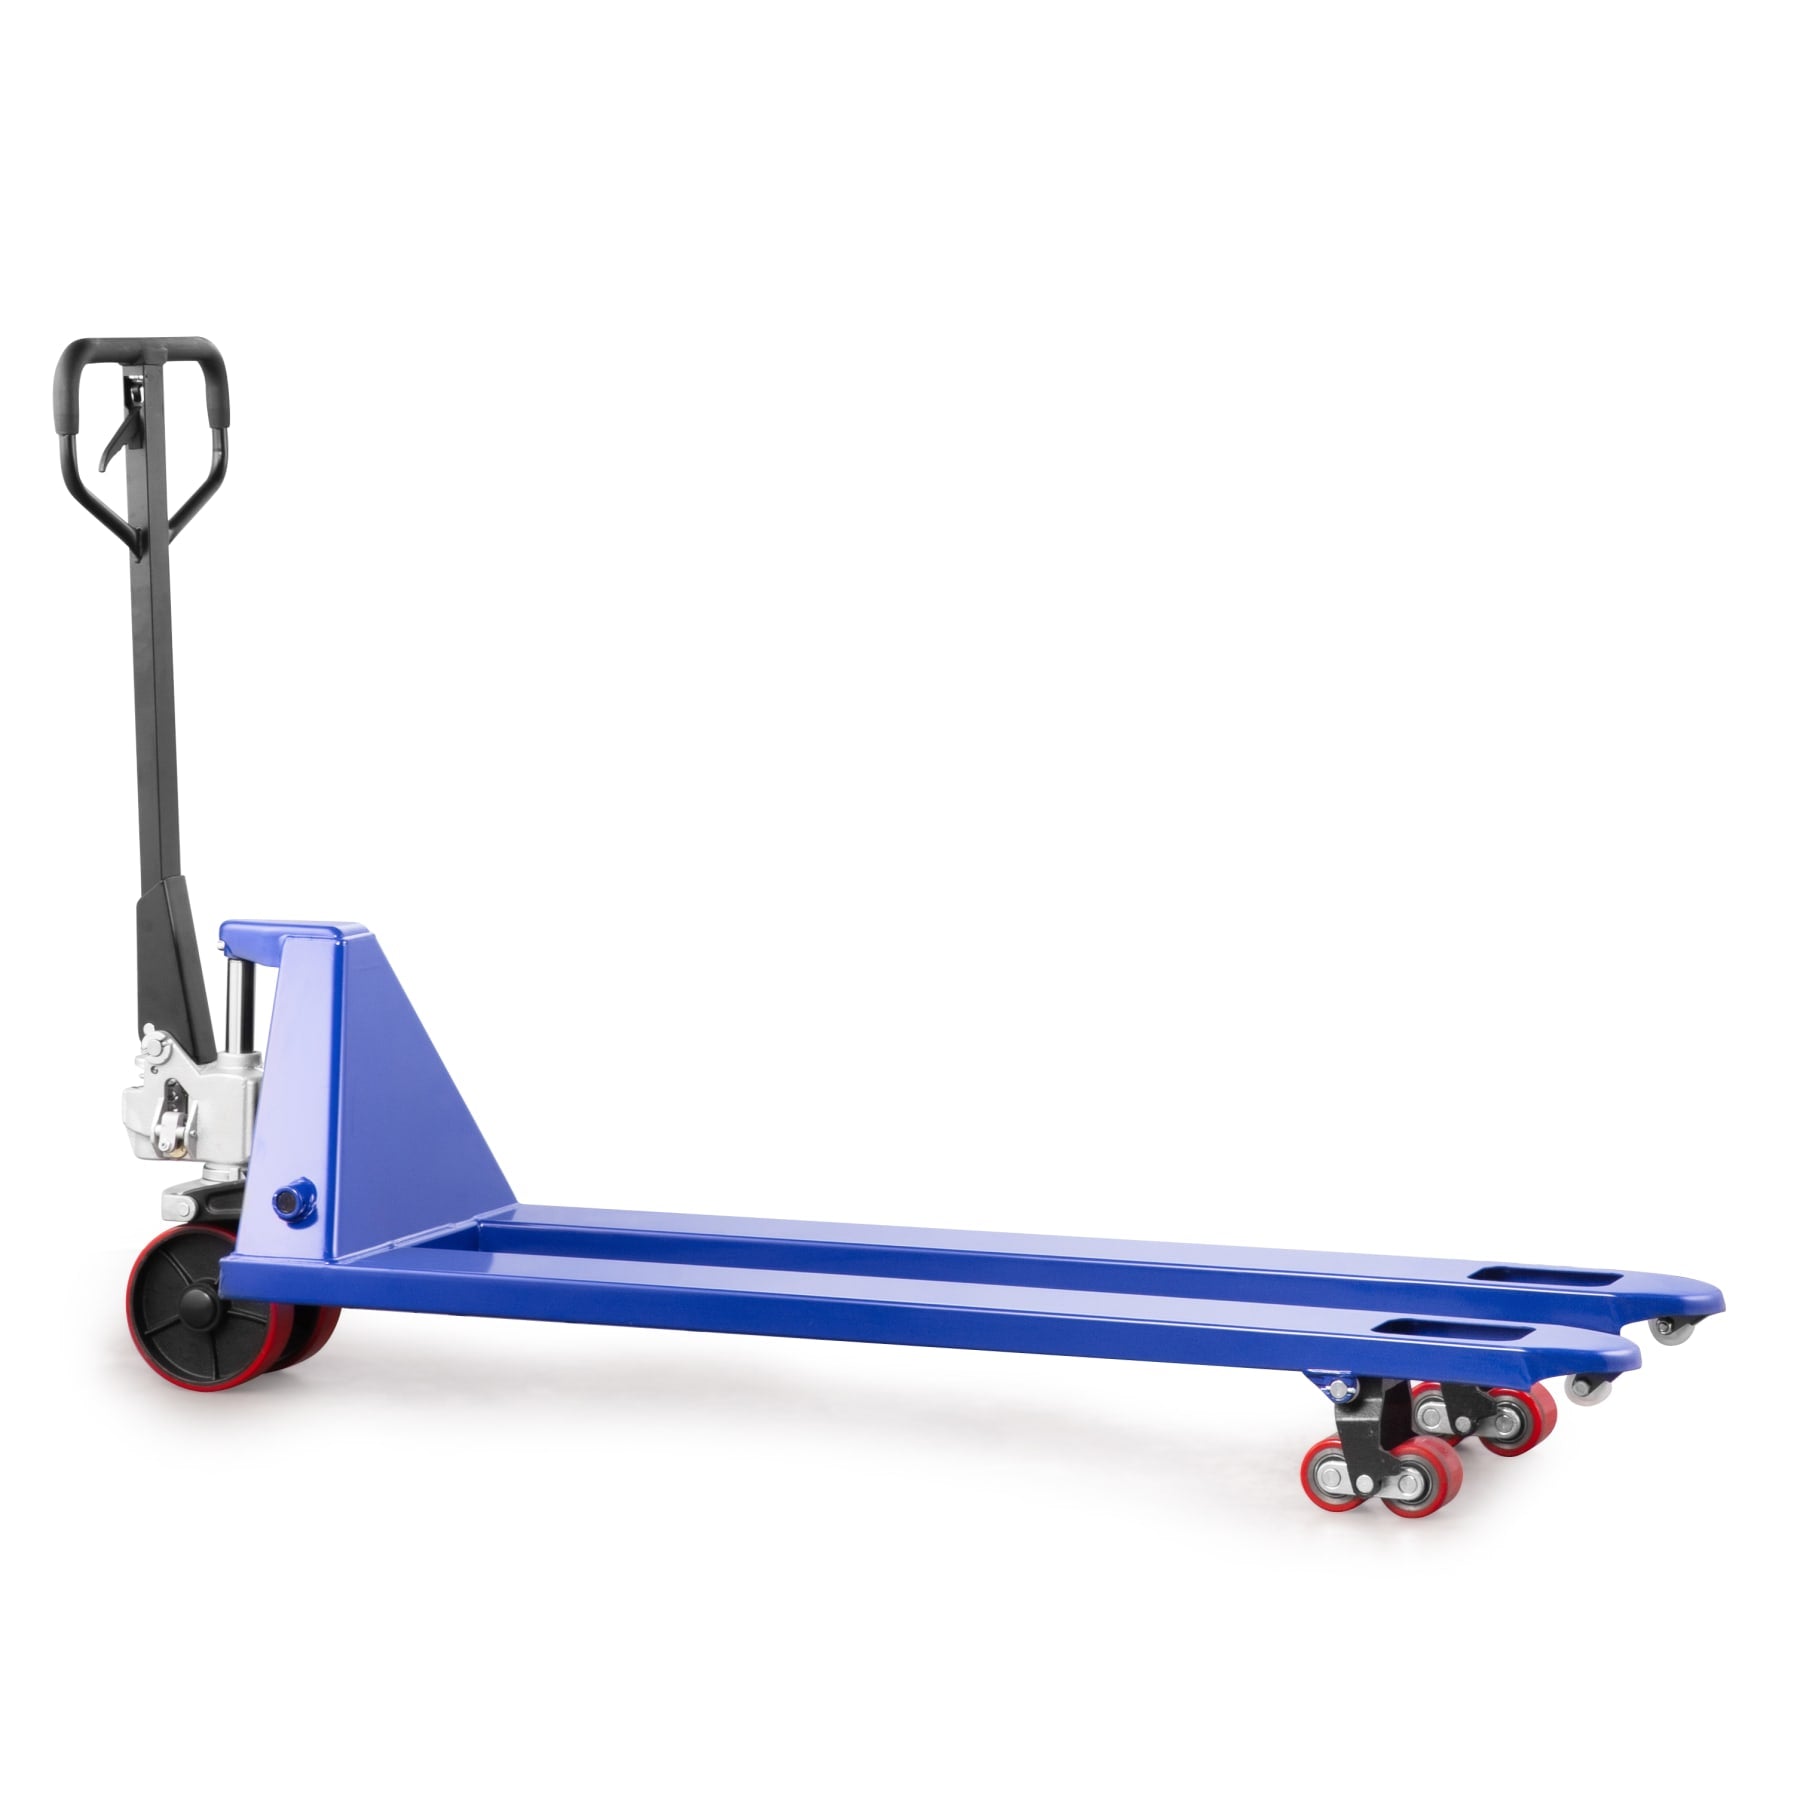 Pallet Truck LONG-M with 1800mm Forks 3